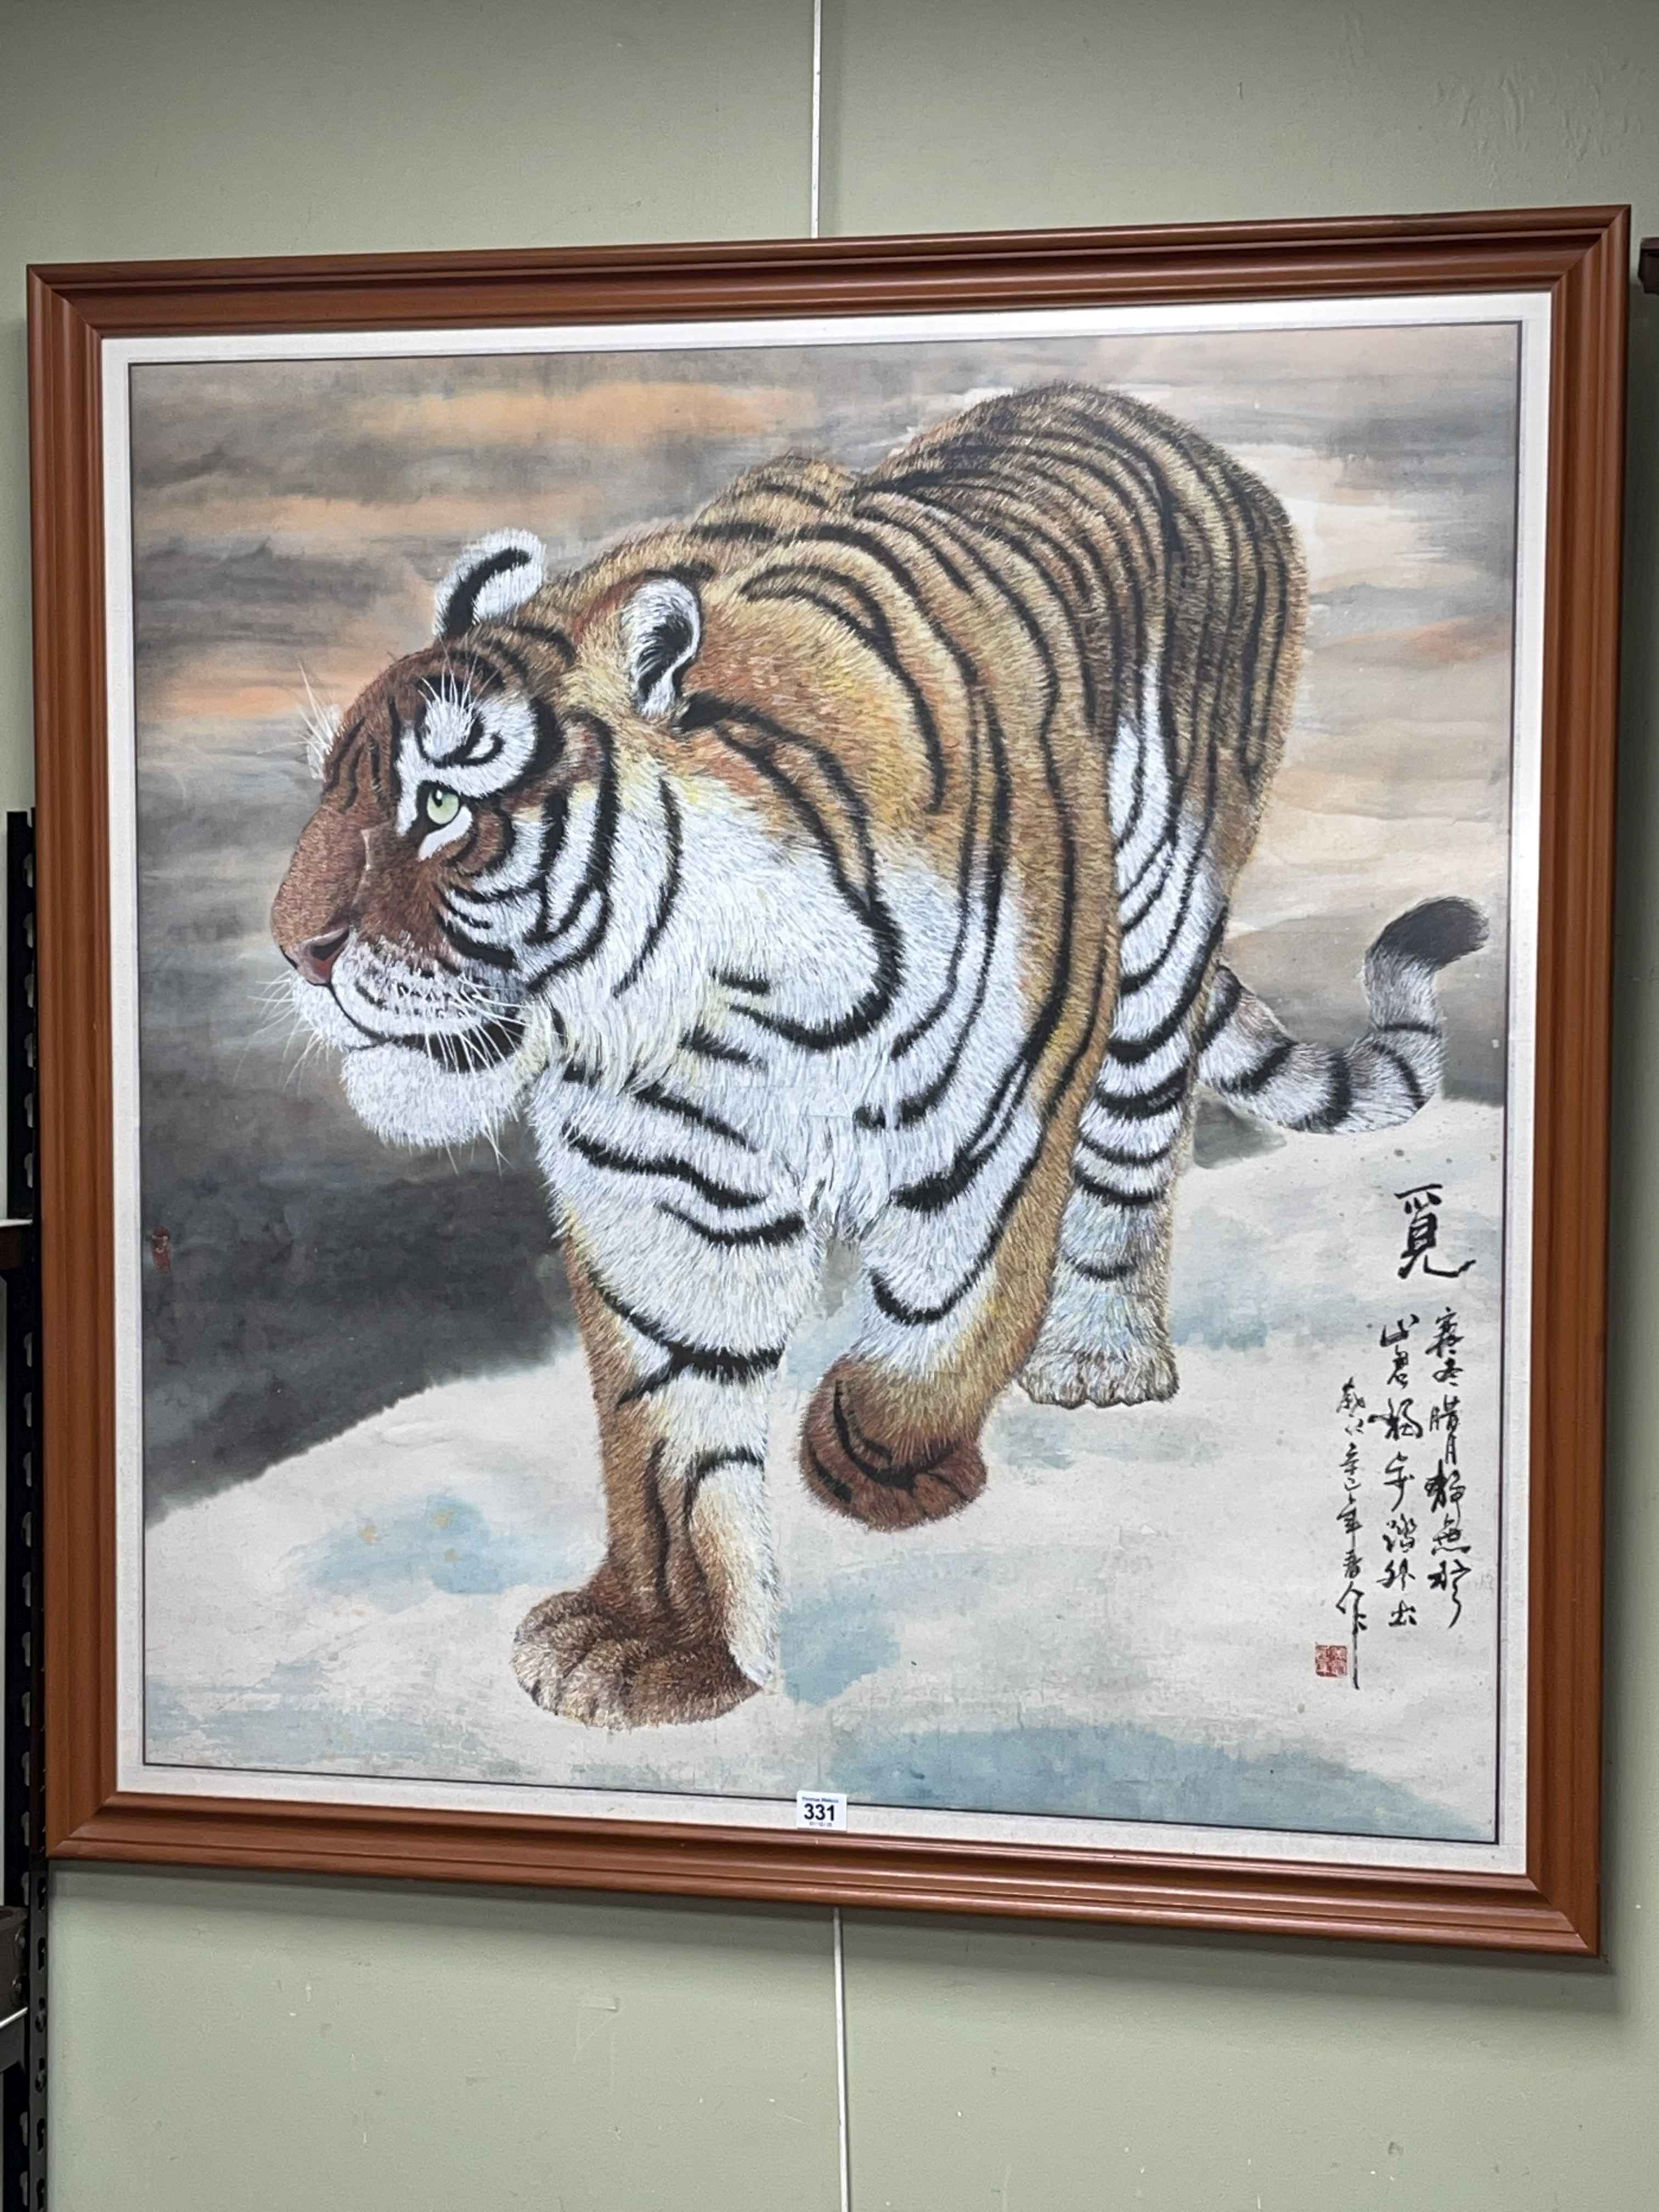 1920's Chinese painting of a tiger, 100cm by 96.5cm including frame.